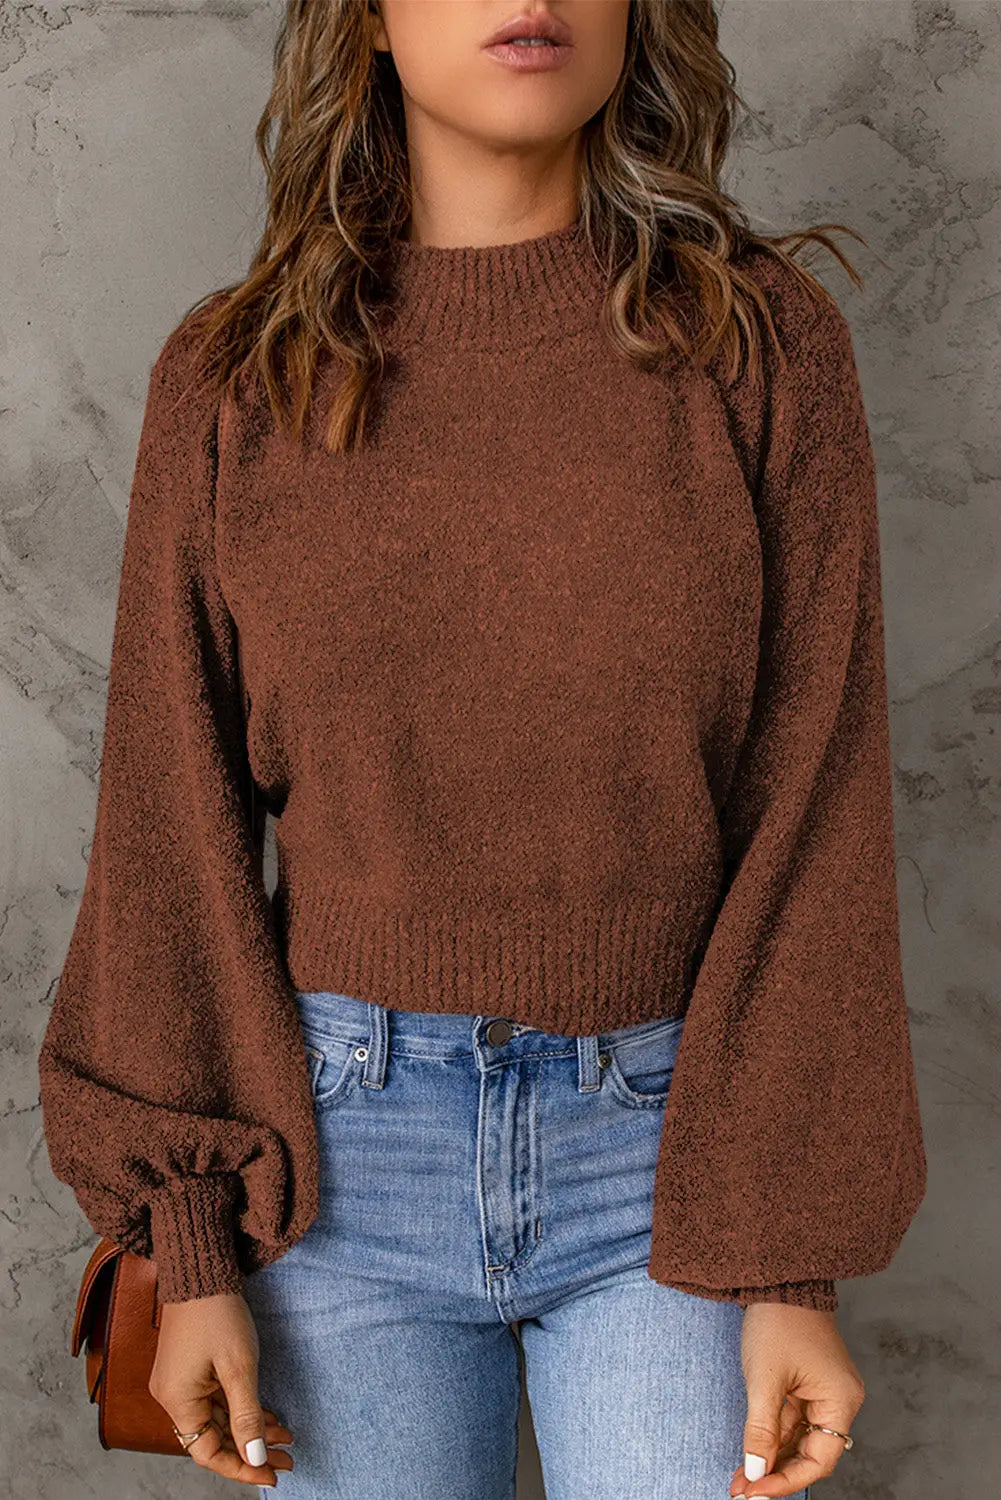 Brown solid color lantern sleeve knitted sweater - s / 95% polyamide + 5% elastane - sweaters & cardigans